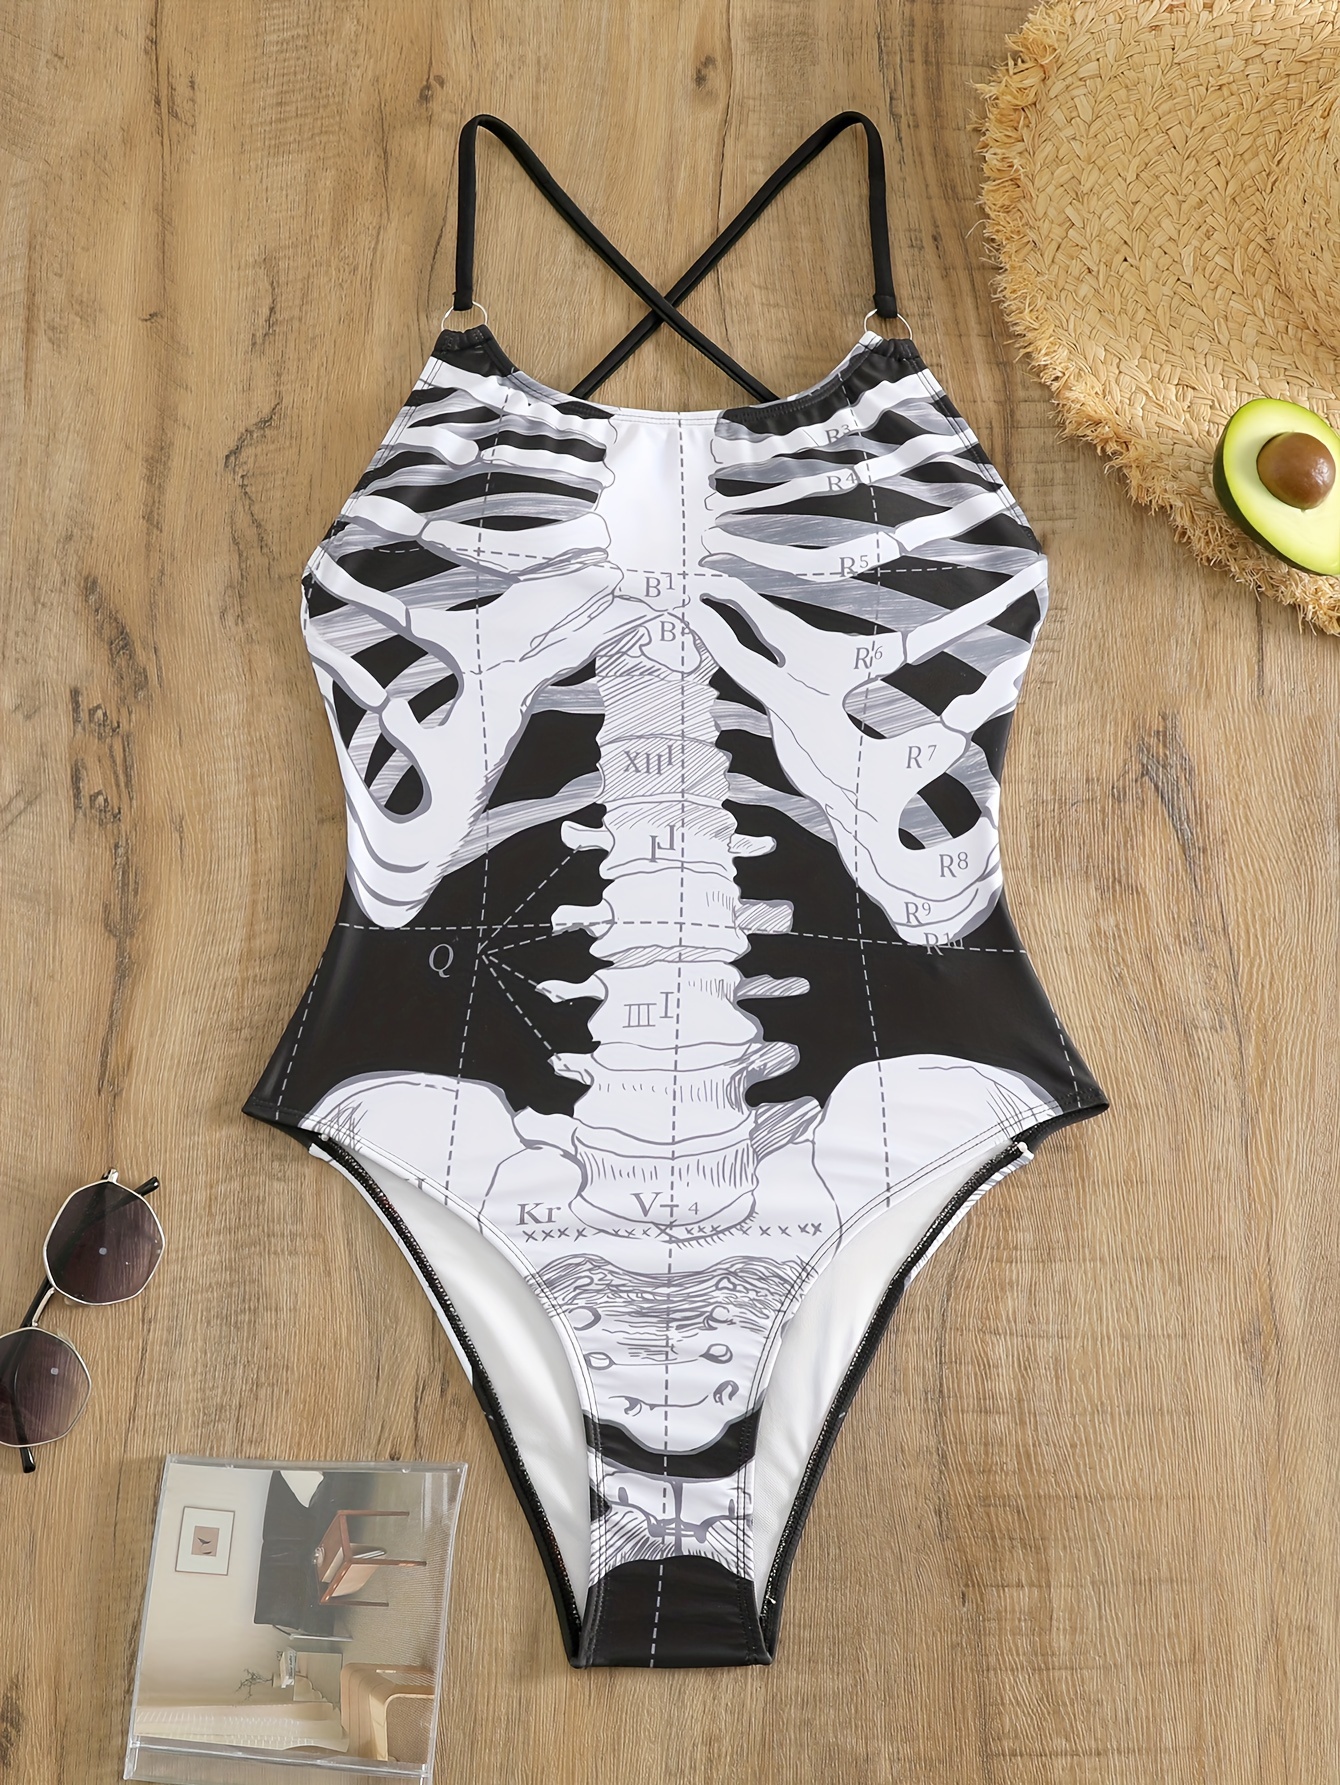 Gothic Punk Style Two Piece Swimsuit - Skull Pattern Bathing Suits